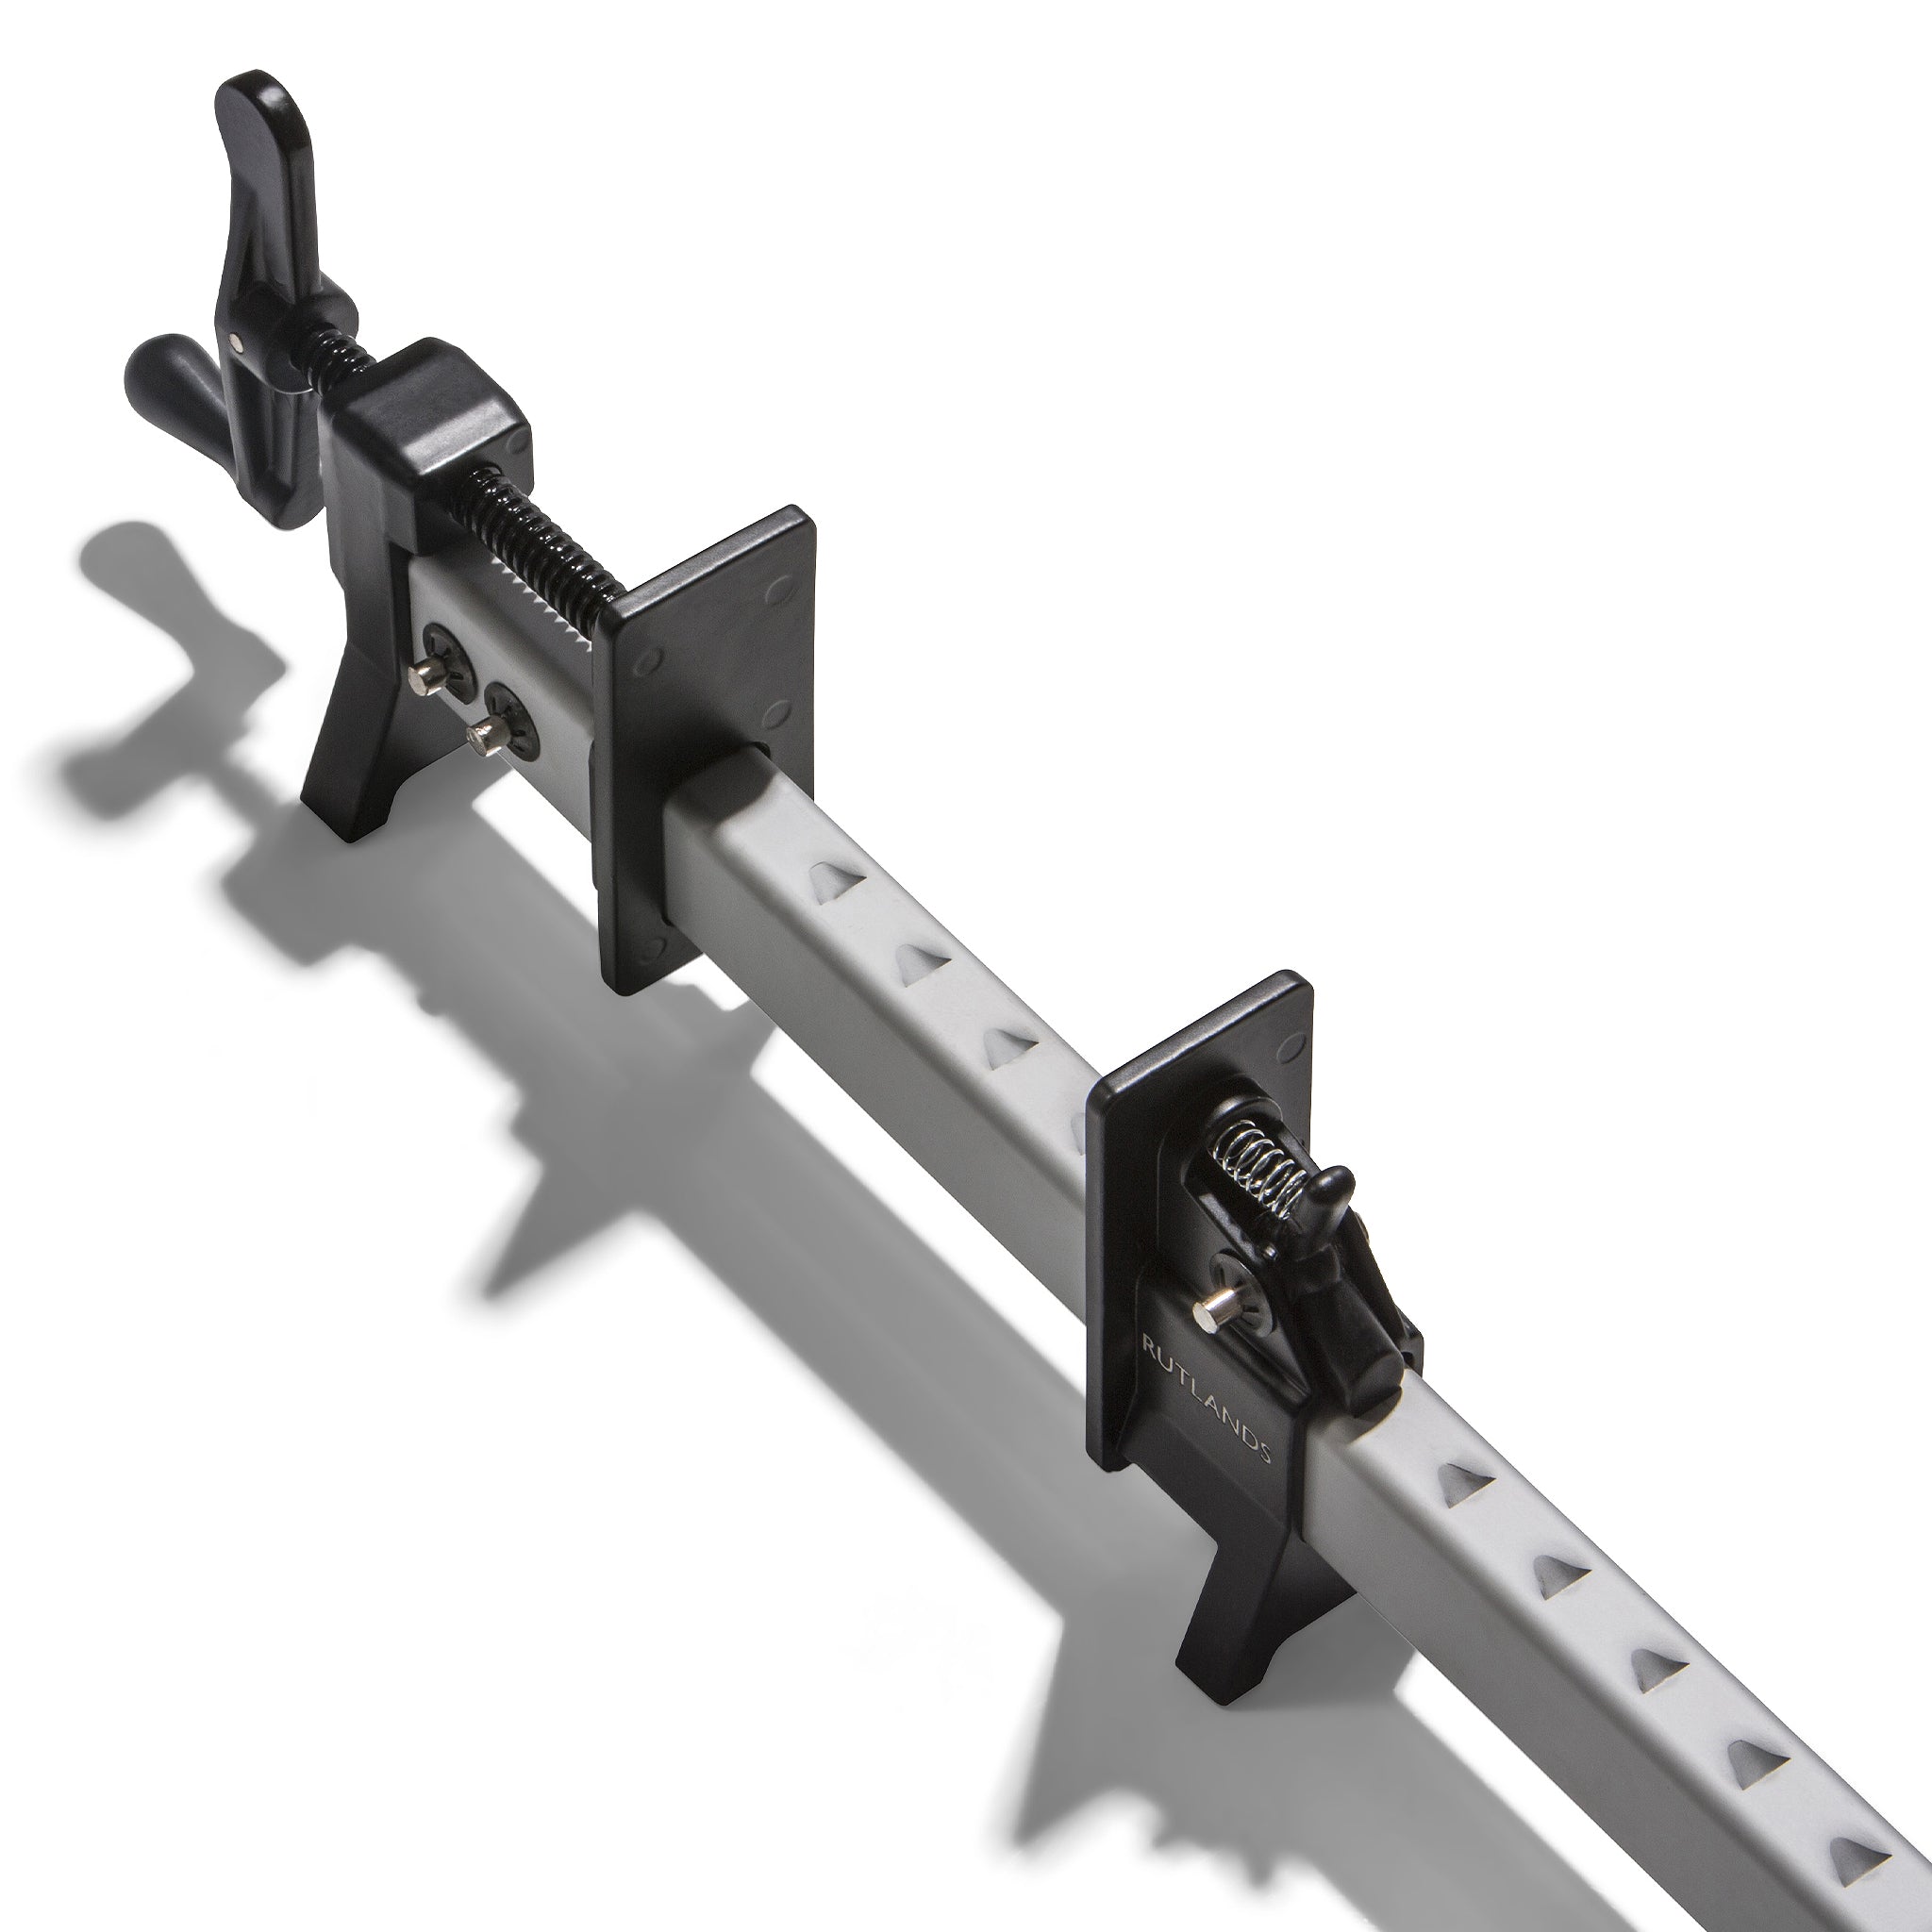 Aluminium Sash Clamps with Feet - 1500mm - Pack of 4